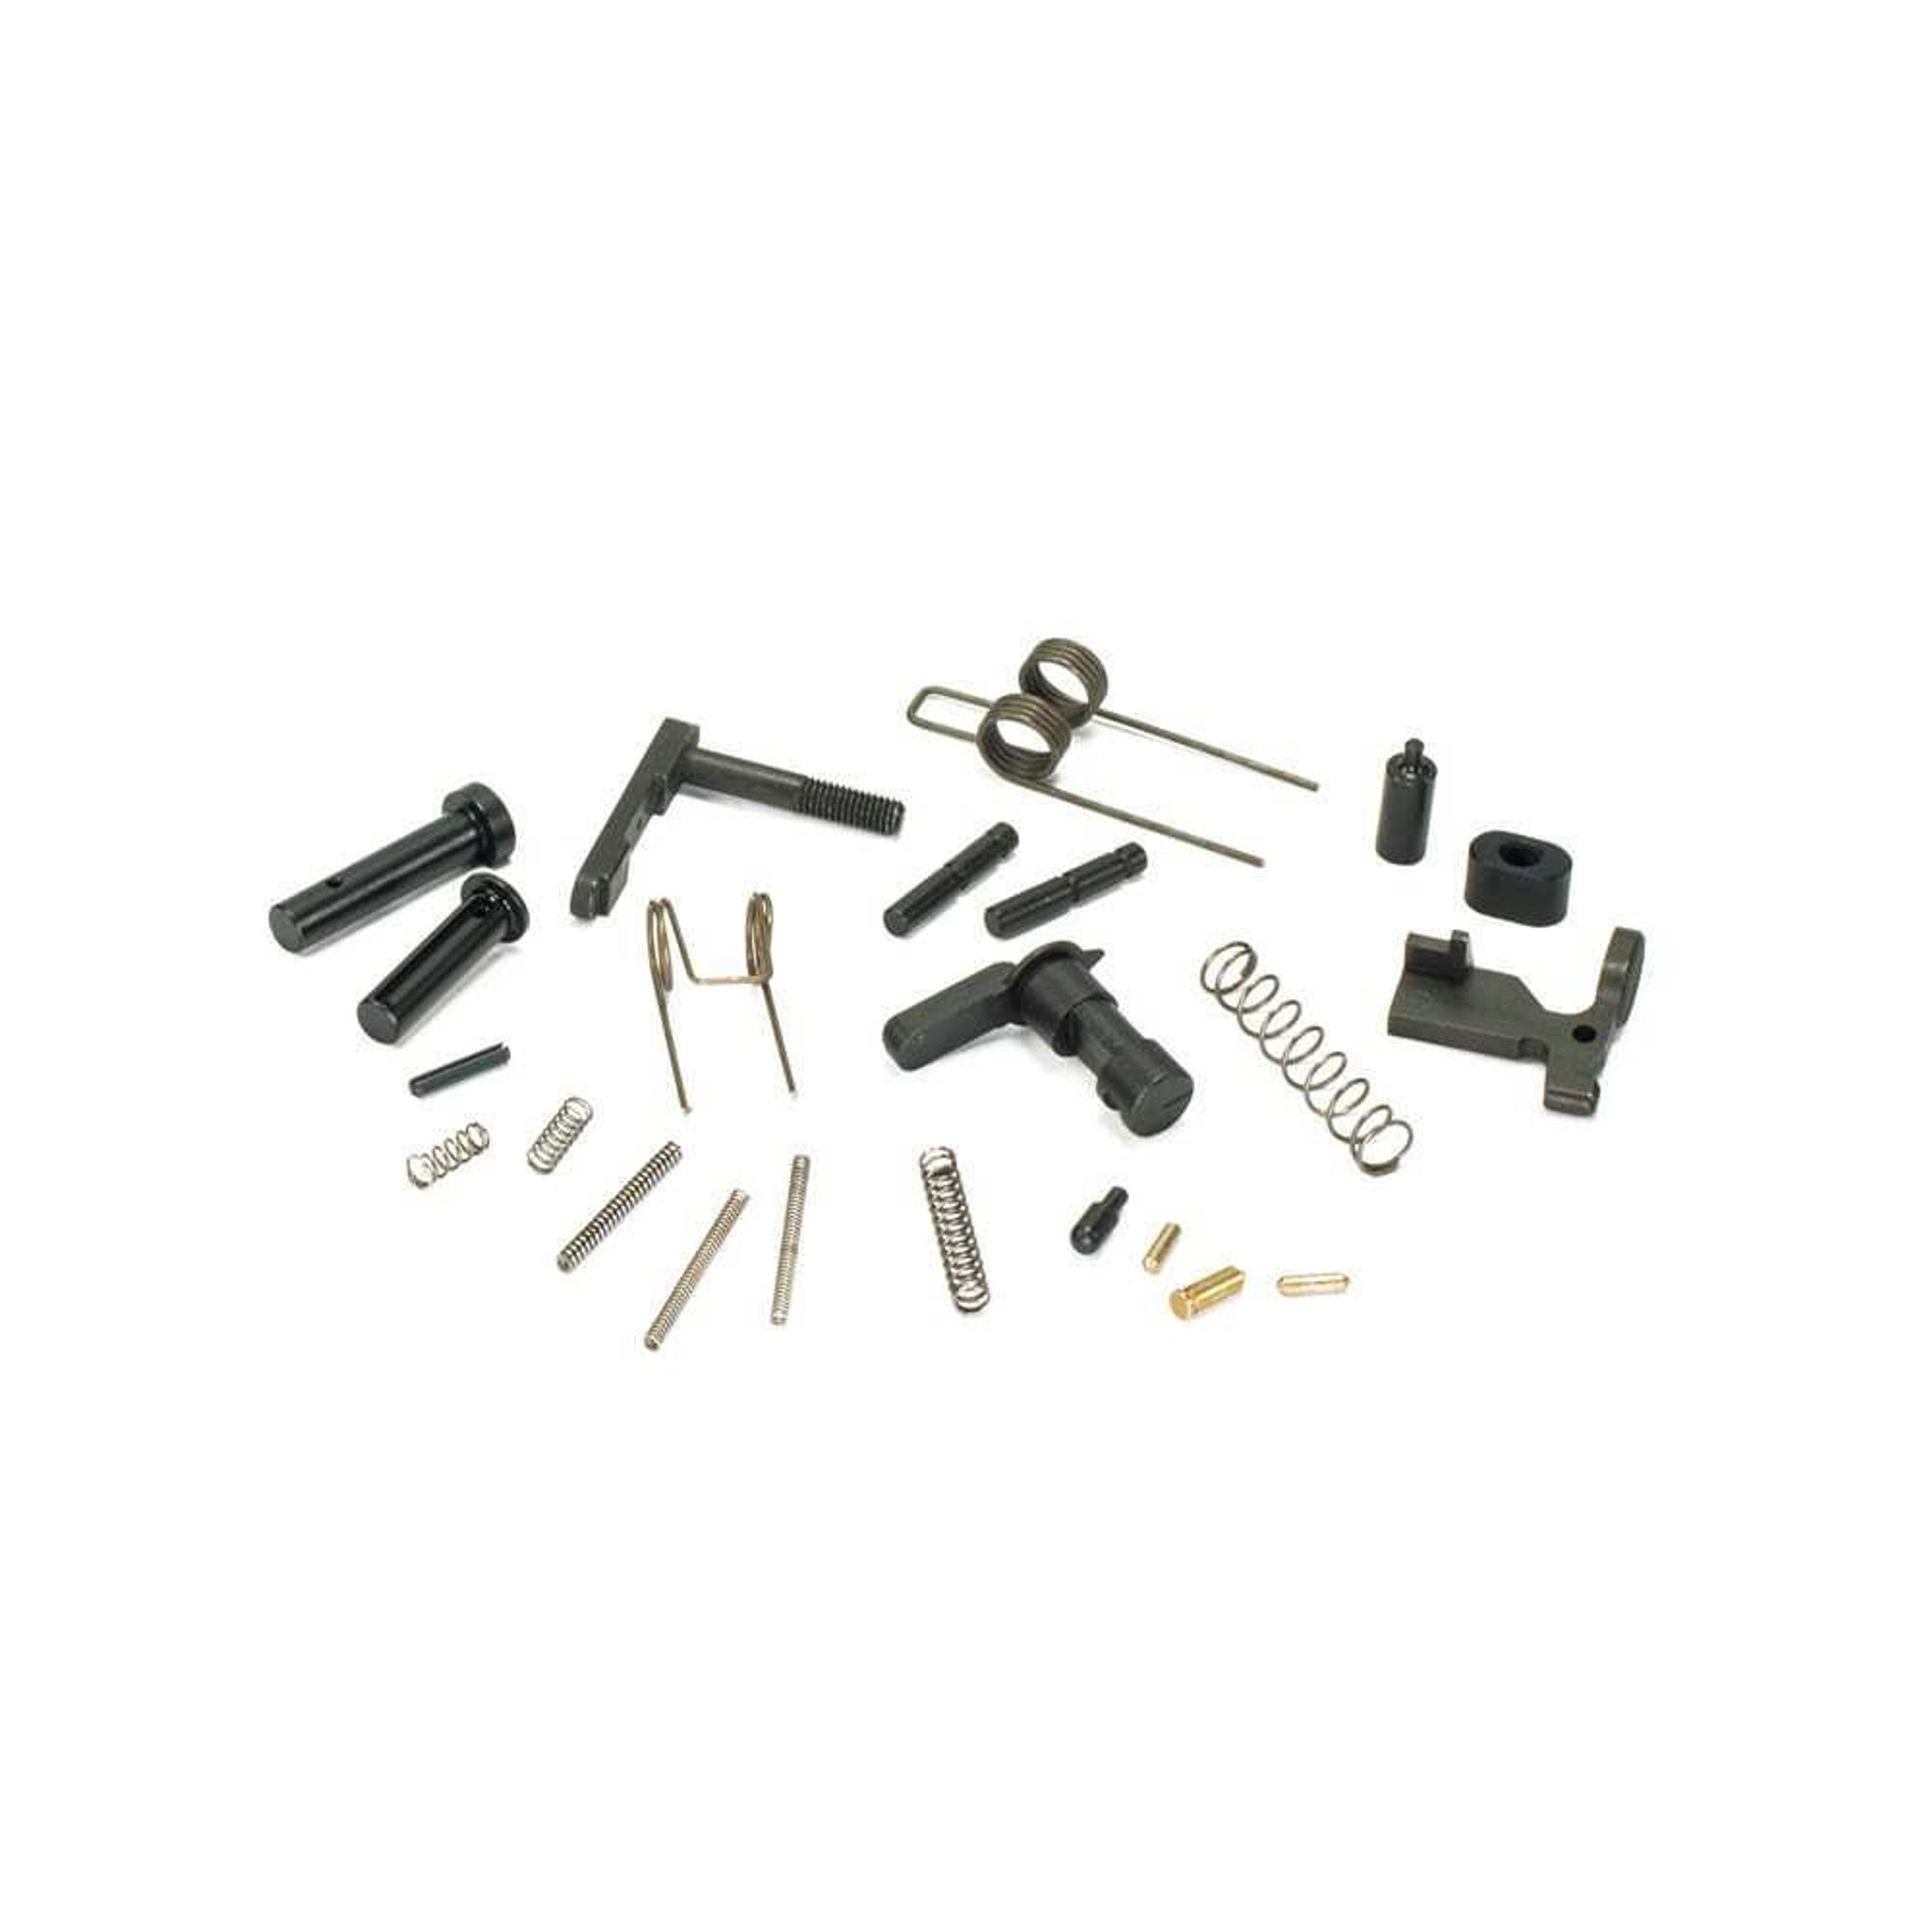 SHARPS BROS - AR-15 LOWER PARTS KIT WITH NO FIRE CONTROL